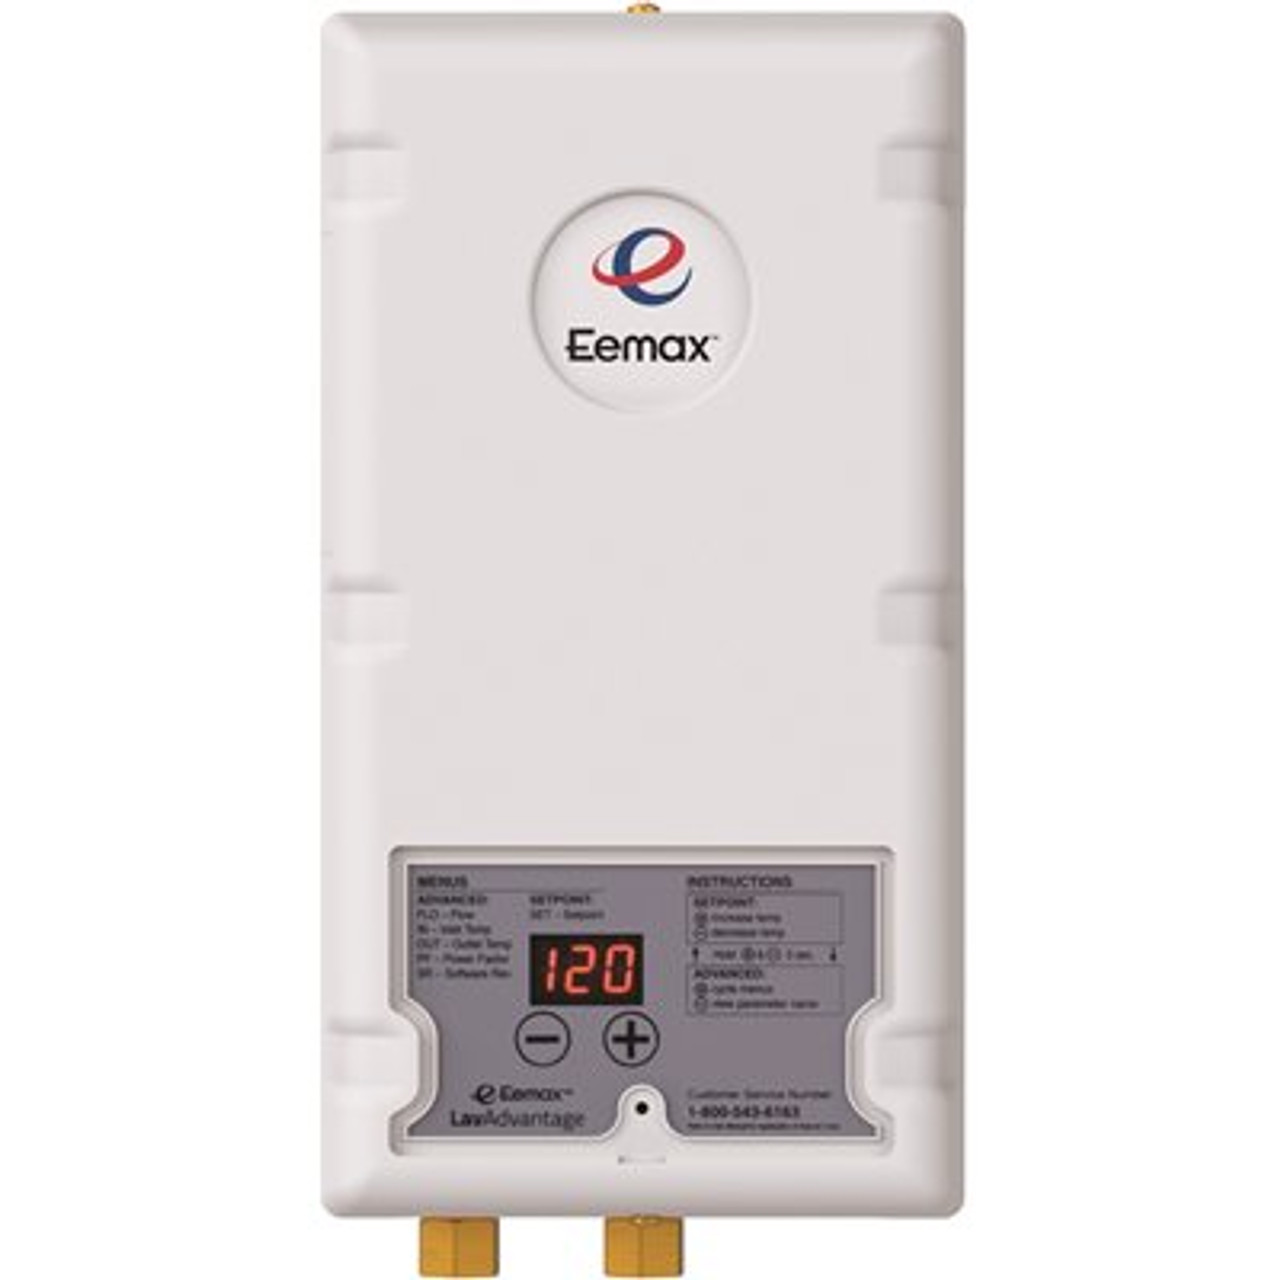 Eemax LavAdvantage 8.3 kW, 208 Volt Commercial Electric Tankless Water Heater, Thermostatic